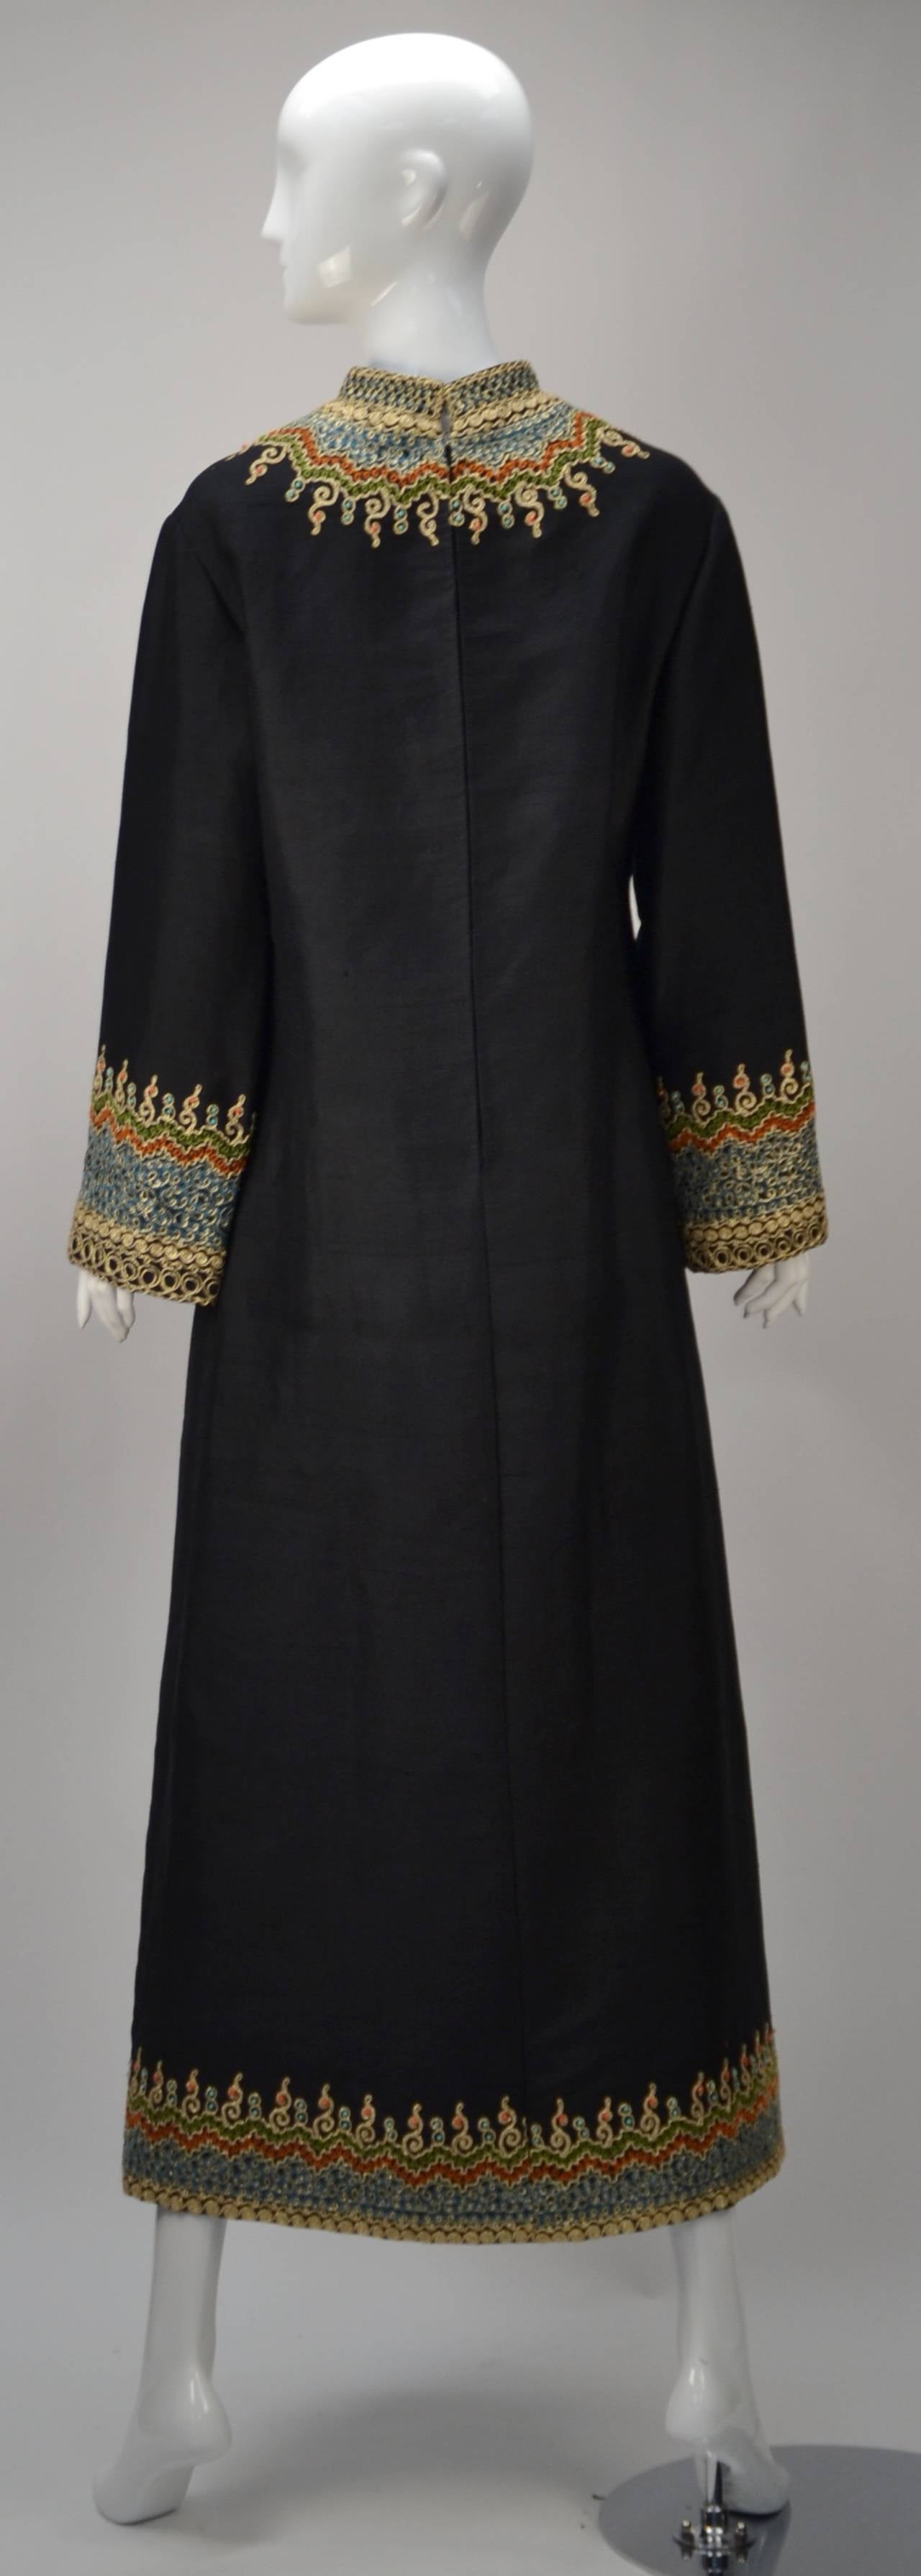 Stunning black silk caftan extravagantly embroidered with metallic gold, green, orange and blue threads. Coral and turquoise beading. Traditional V-neck with mandarin collar. Center front slit. Exquisite!

Modern US size 6/8.

Slit measurement: